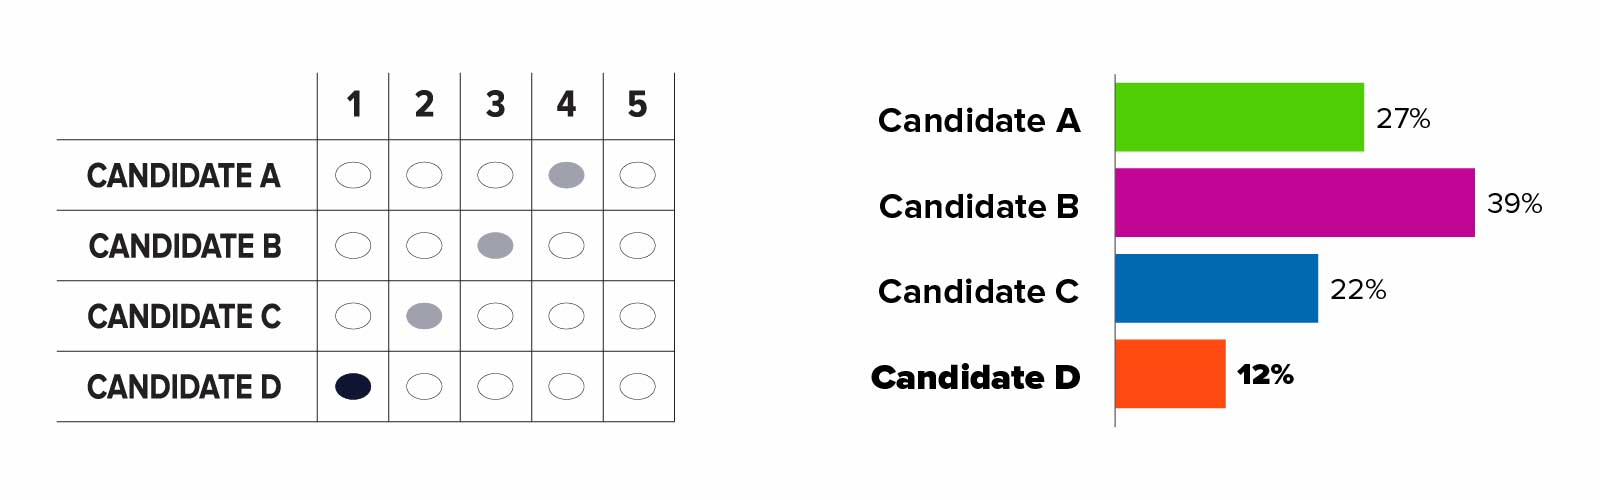 On left: A correctly marked RCV grid ballot where candidate A through D appears in rows and number 1 through 5 appears in columns. Candidate D is ranked 1, Candidate C is ranked 2, Candidate B is ranked 3, and Candidate A is ranked 4. The oval for Candidate D who is ranked 1 is darker than the other ovals. On right: Bar chart displaying the results of first-choice vote totals. Candidate A is shown in green and has 27 percent of percent of first-choice votes. Candidate B is shown in purple and has 39 percent. Candidate C is shown in blue and has 22 percent. Candidate D is shown in orange and has 12 percent. Candidate D has the fewest votes in this round. one candidate eliminated, votes redistributed: On left: A correctly marked RCV grid ballot where candidate A through D appears in rows and number 1 through 5 appears in columns. Candidate D is ranked 1, Candidate C is ranked 2, Candidate B is ranked 3, and Candidate A is ranked 4. Candidate D's name is grayed out because they were eliminated in the last round. The oval for Candidate C who is ranked 2 is darker than the other ovals. On right: Bar chart displaying the results of vote after Round 1. Candidate A is shown in green and has 27 percent of first-choice votes. Candidate B is shown in purple and has 39 percent. Candidate C is shown in blue and has 22 percent. Candidate D has 12 percent, their entire bar and name is grayed out and arrows point from Candidate D to the three remaining candidate's bars. The ballots for the 12 percent of voters whose top choice in this round was Candidate D will move to the next-highest ranked candidate on their ballots.